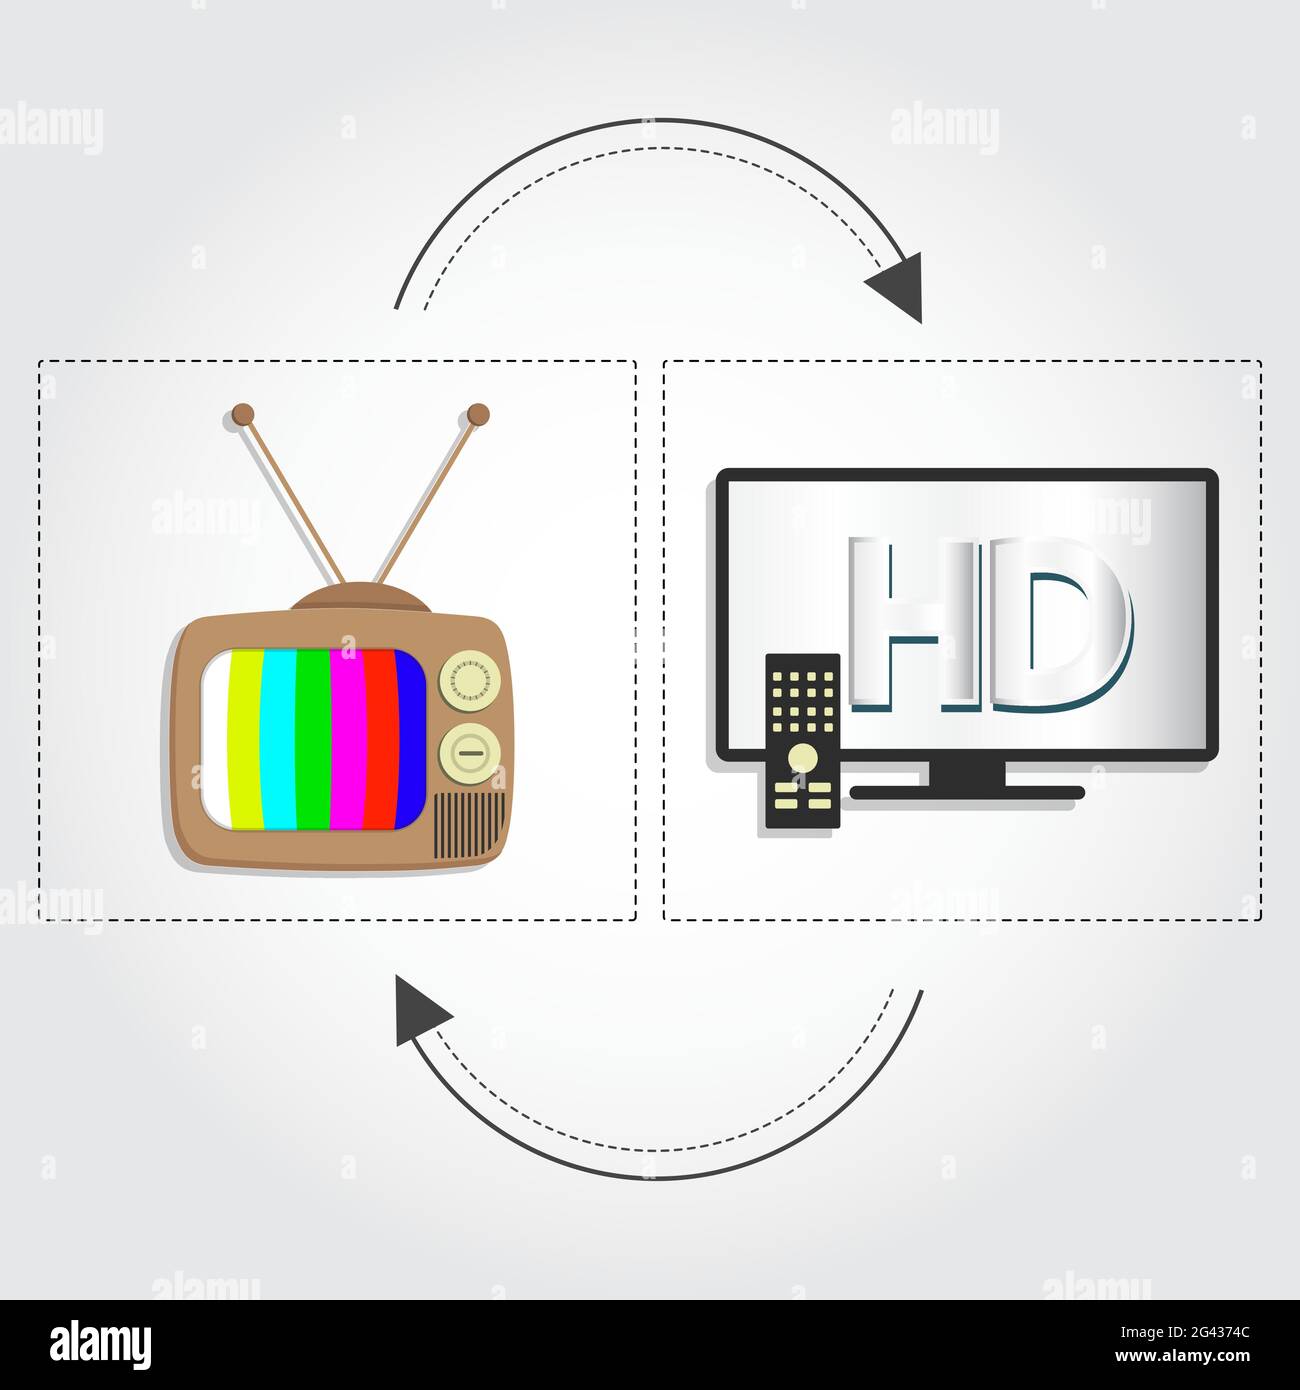 Tv old as opposed to a modern tv in high resolution Stock Vector